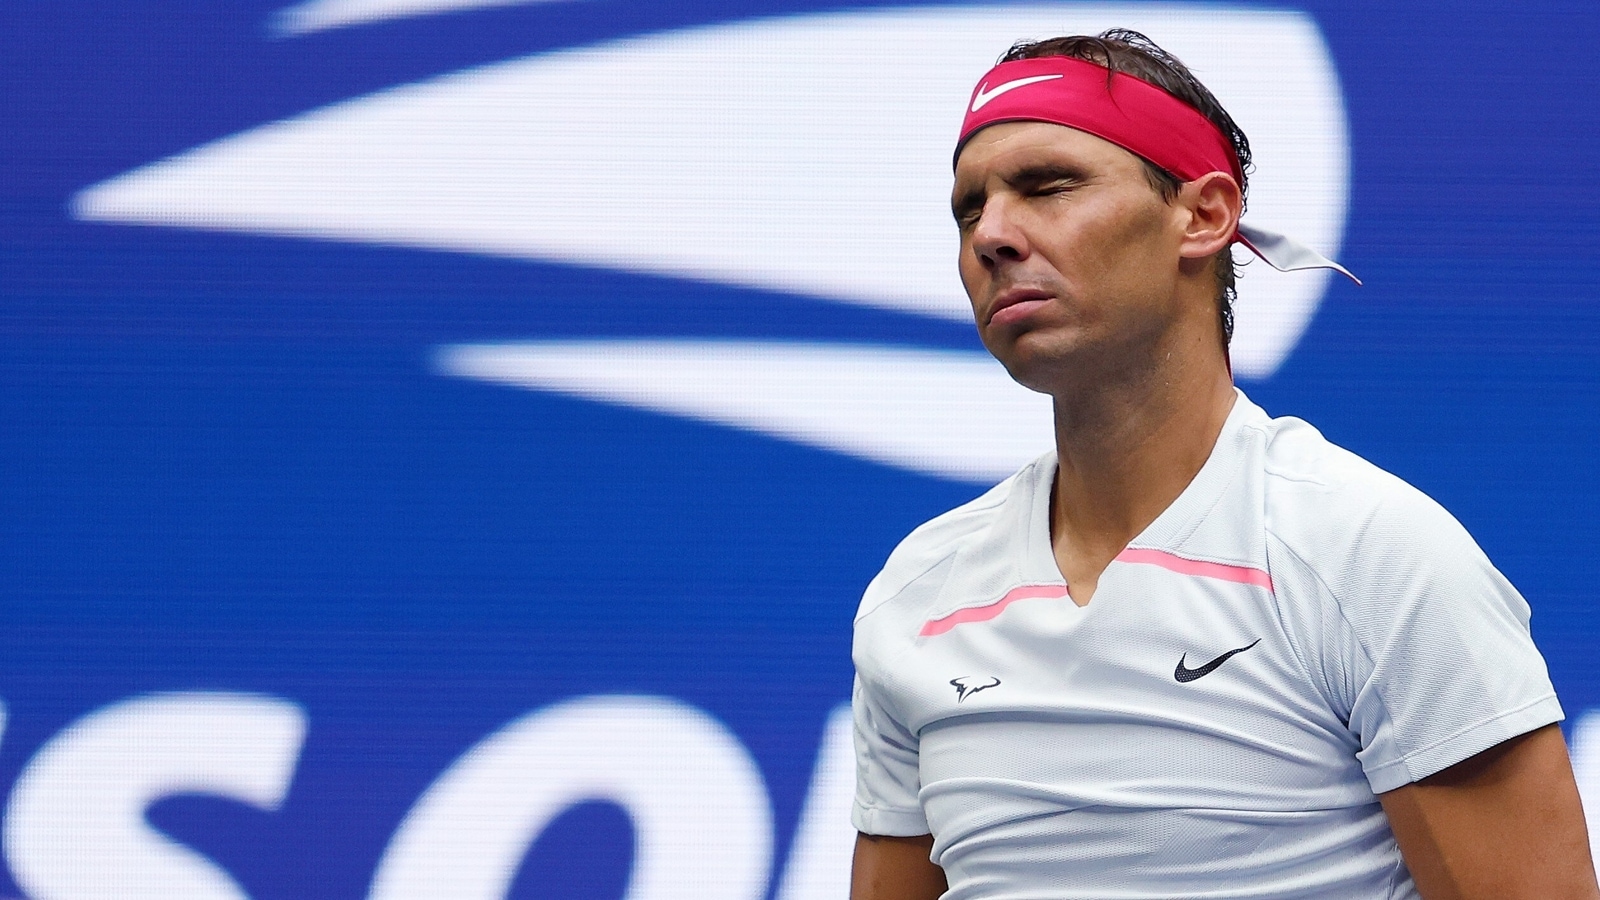 Rafael Nadal knocked out of US Open 2022, loses to Frances Tiafoe in round of 16 Tennis News